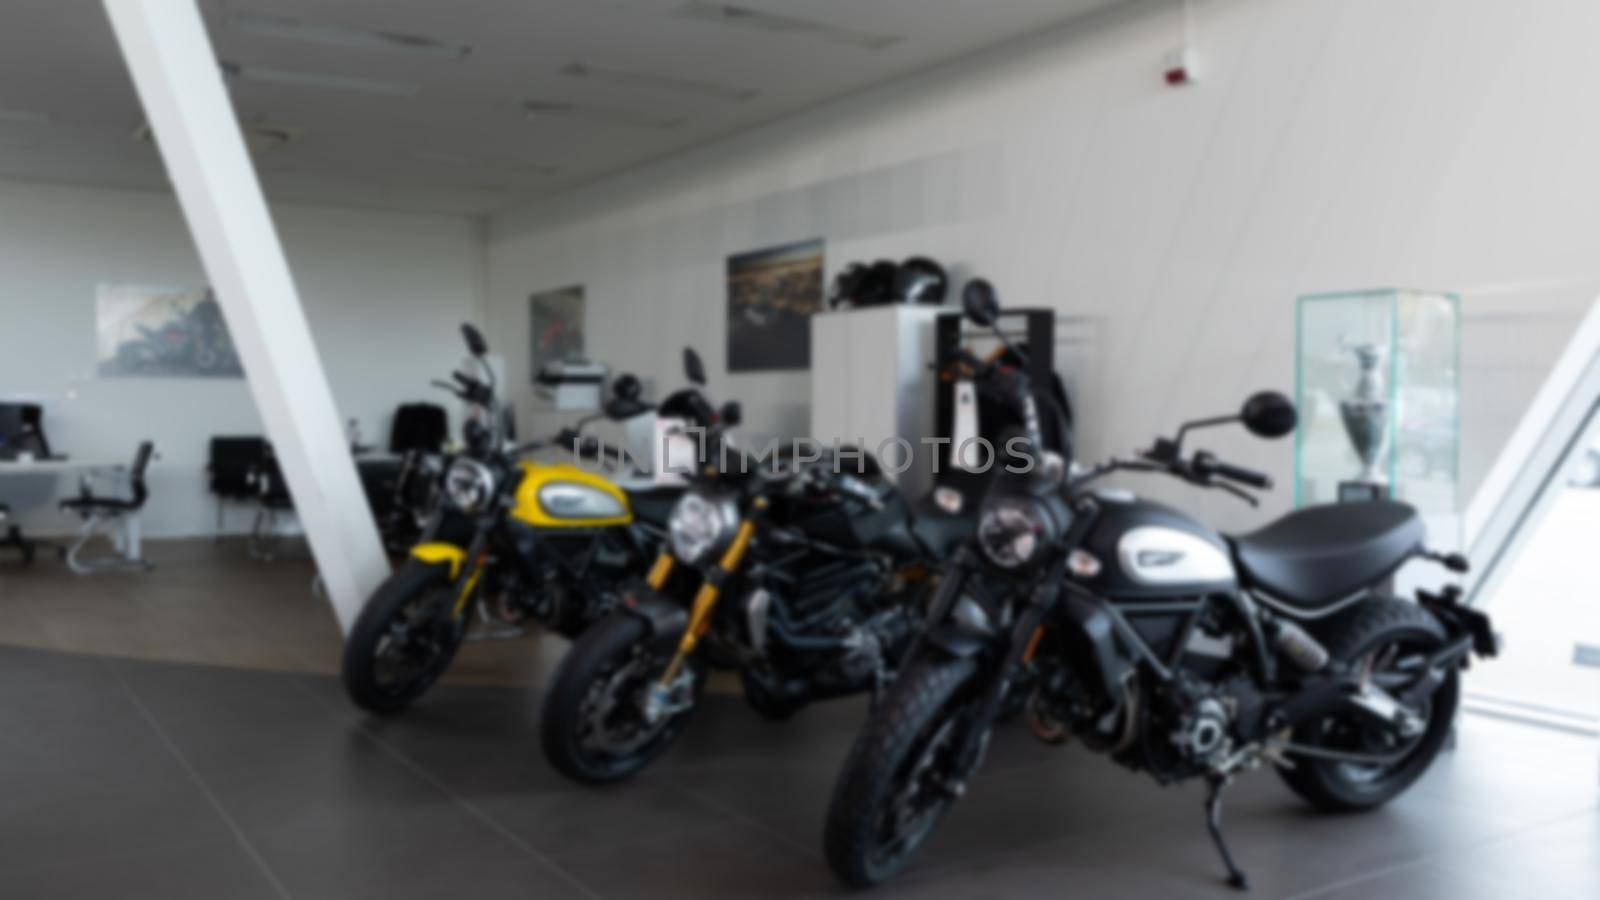 dealership of premium class motorcycles, photo with blur.